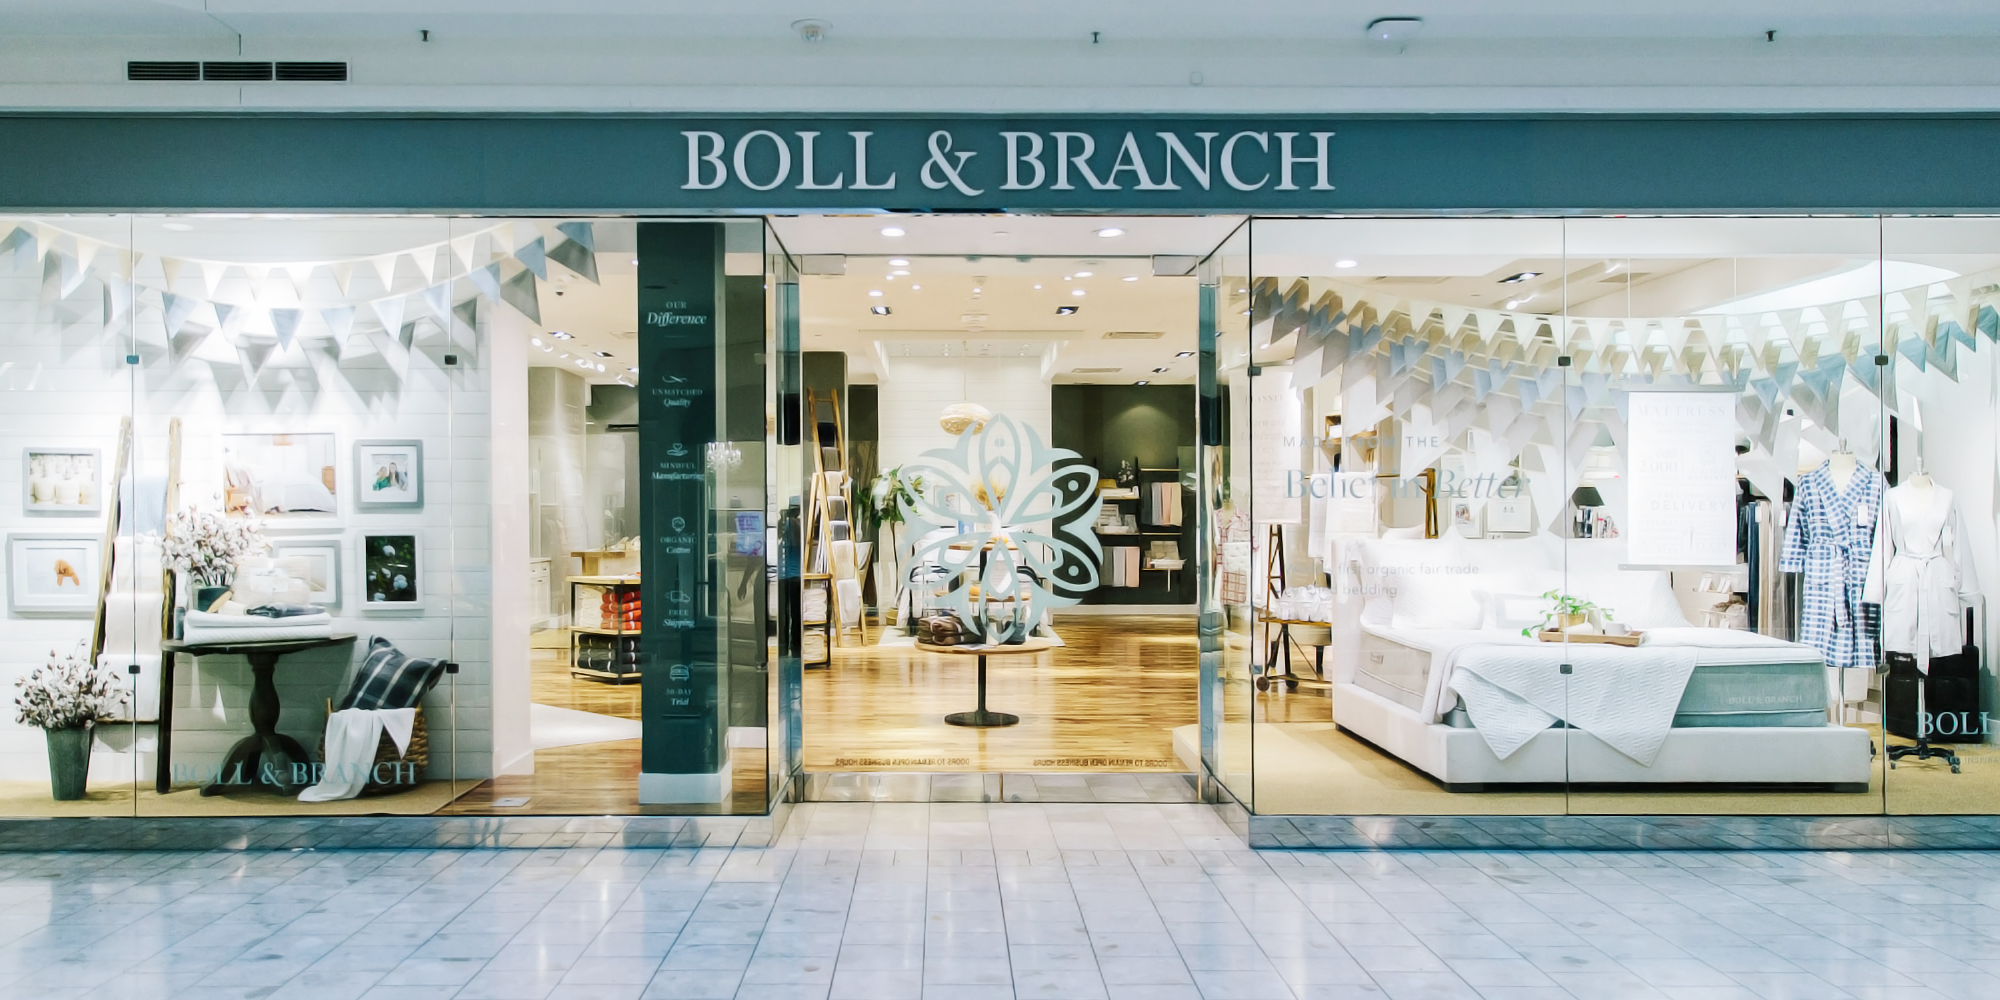 Boll & Branch opens a store at Short Hills Mall